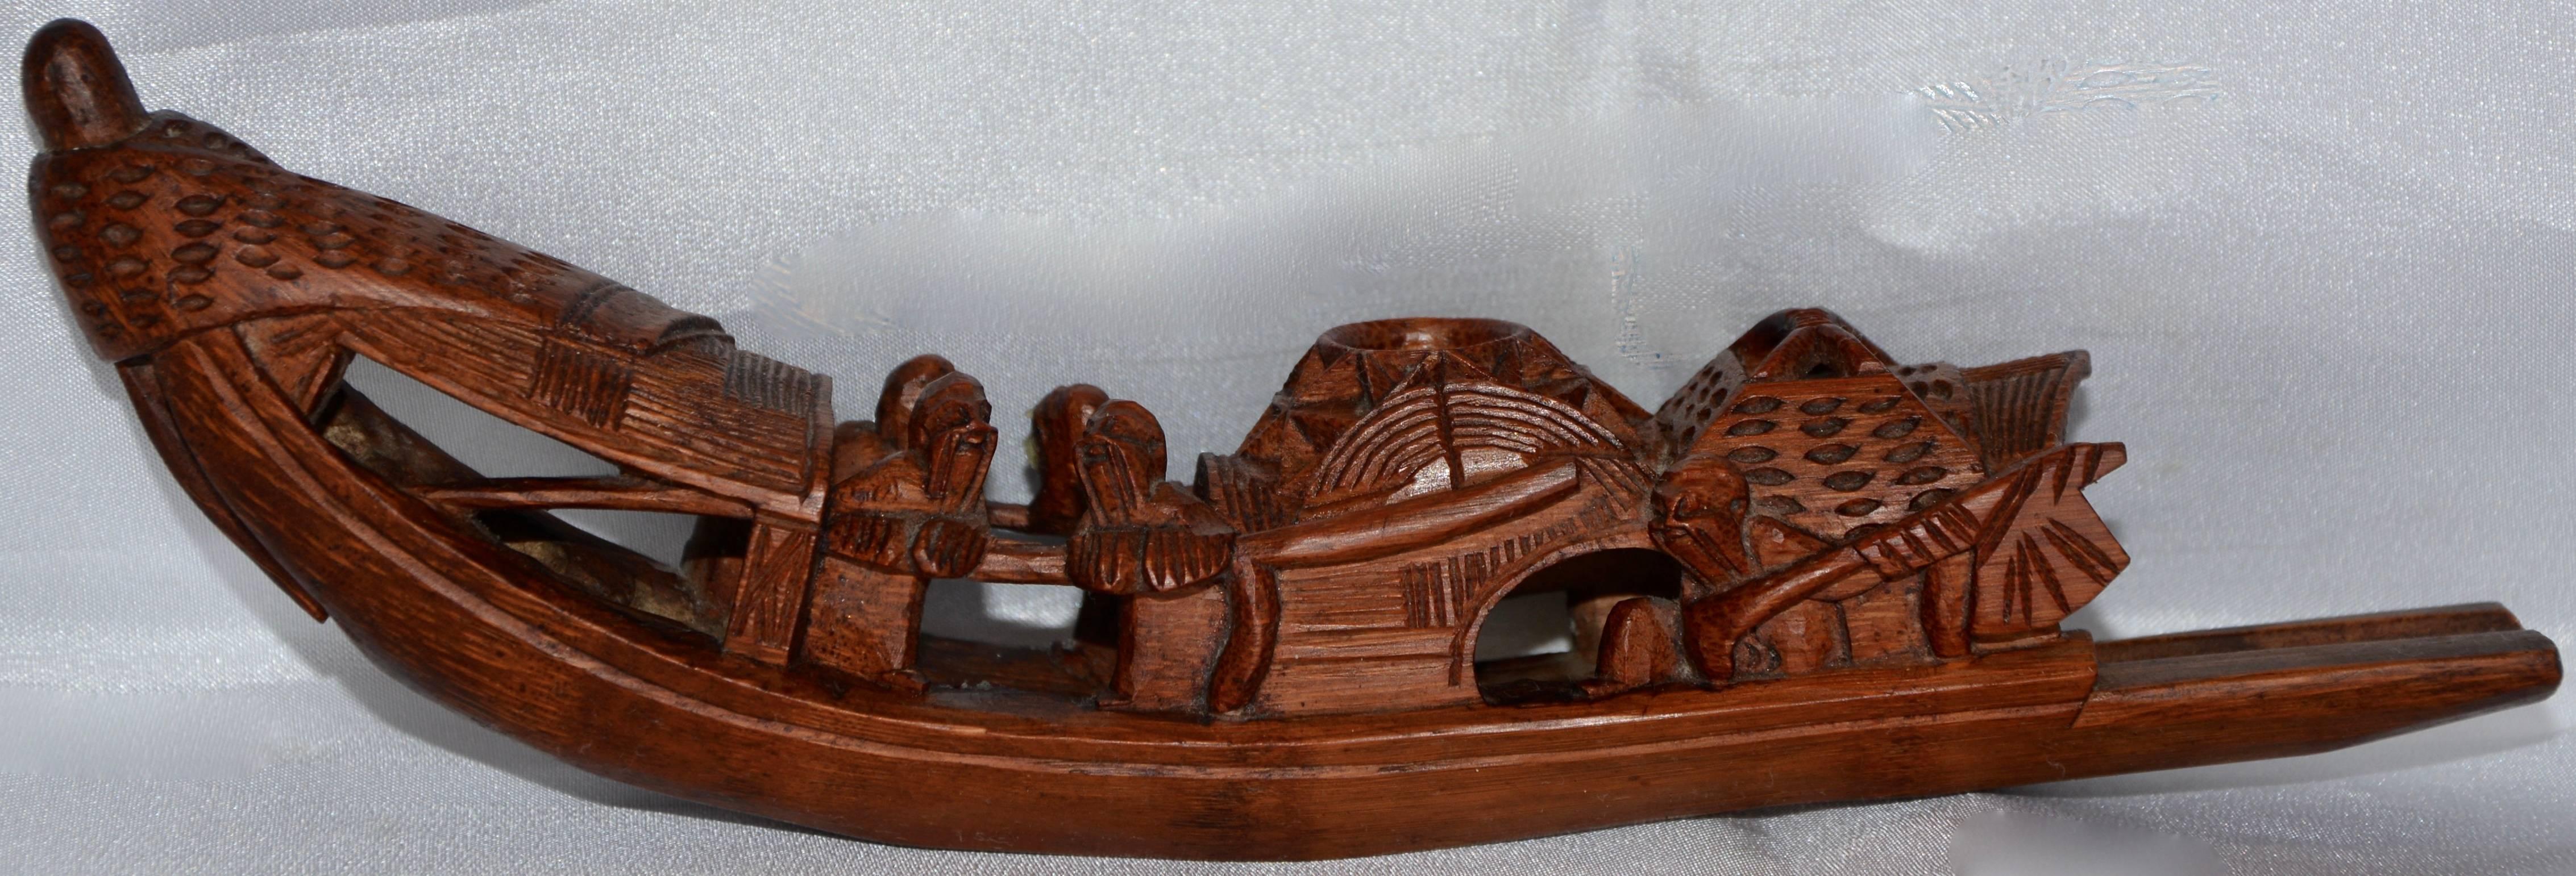 Hand carved details are lovely on this unusual incense burner. The men are rowing the boat and appear to have a smile on their faces. The back has a slip to place your incense.